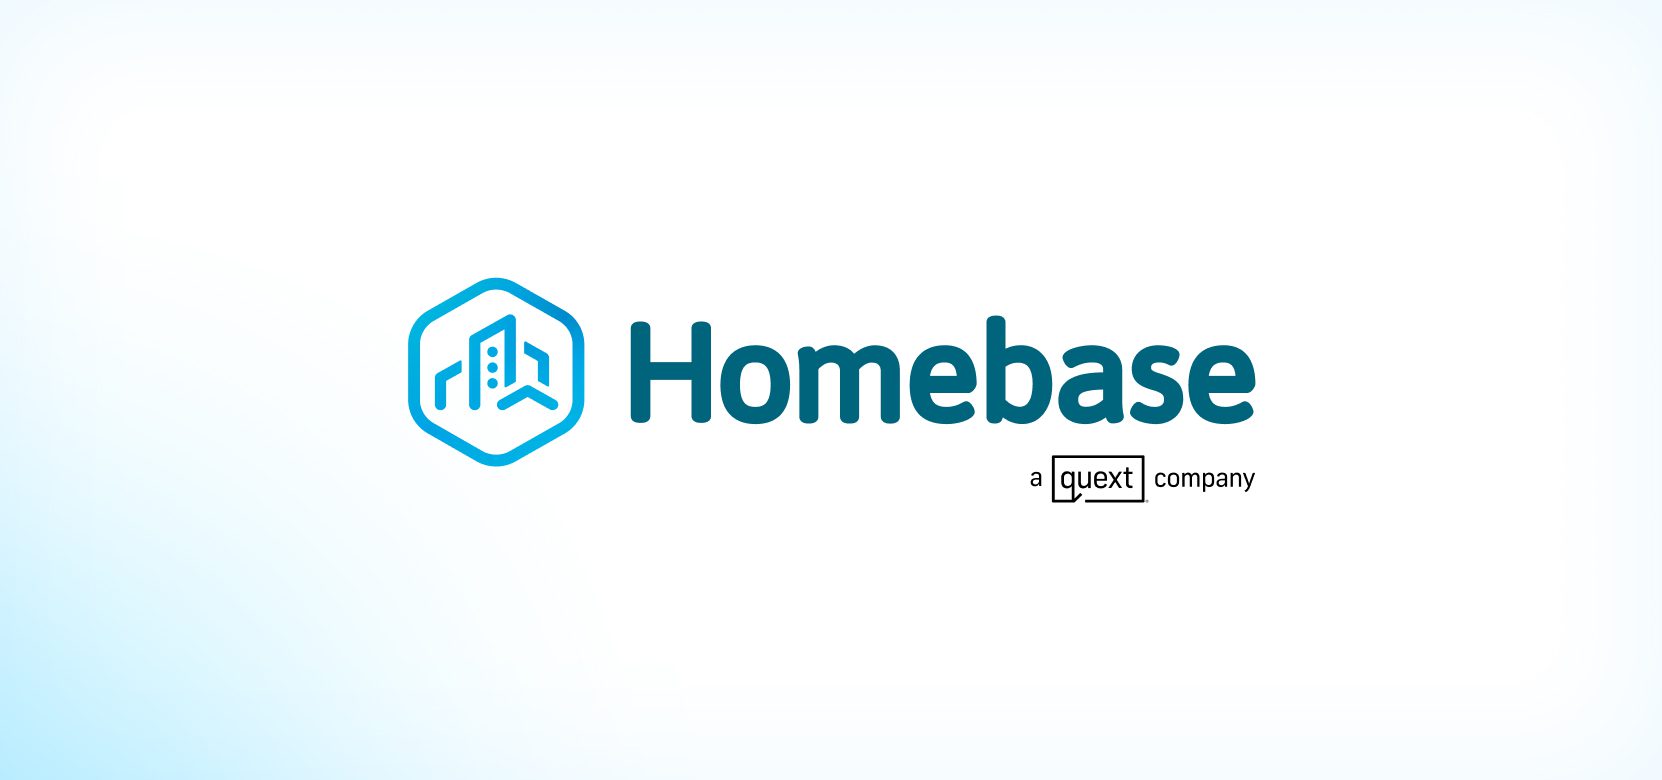 What is the Self-learning AI in HomeBase 3? 